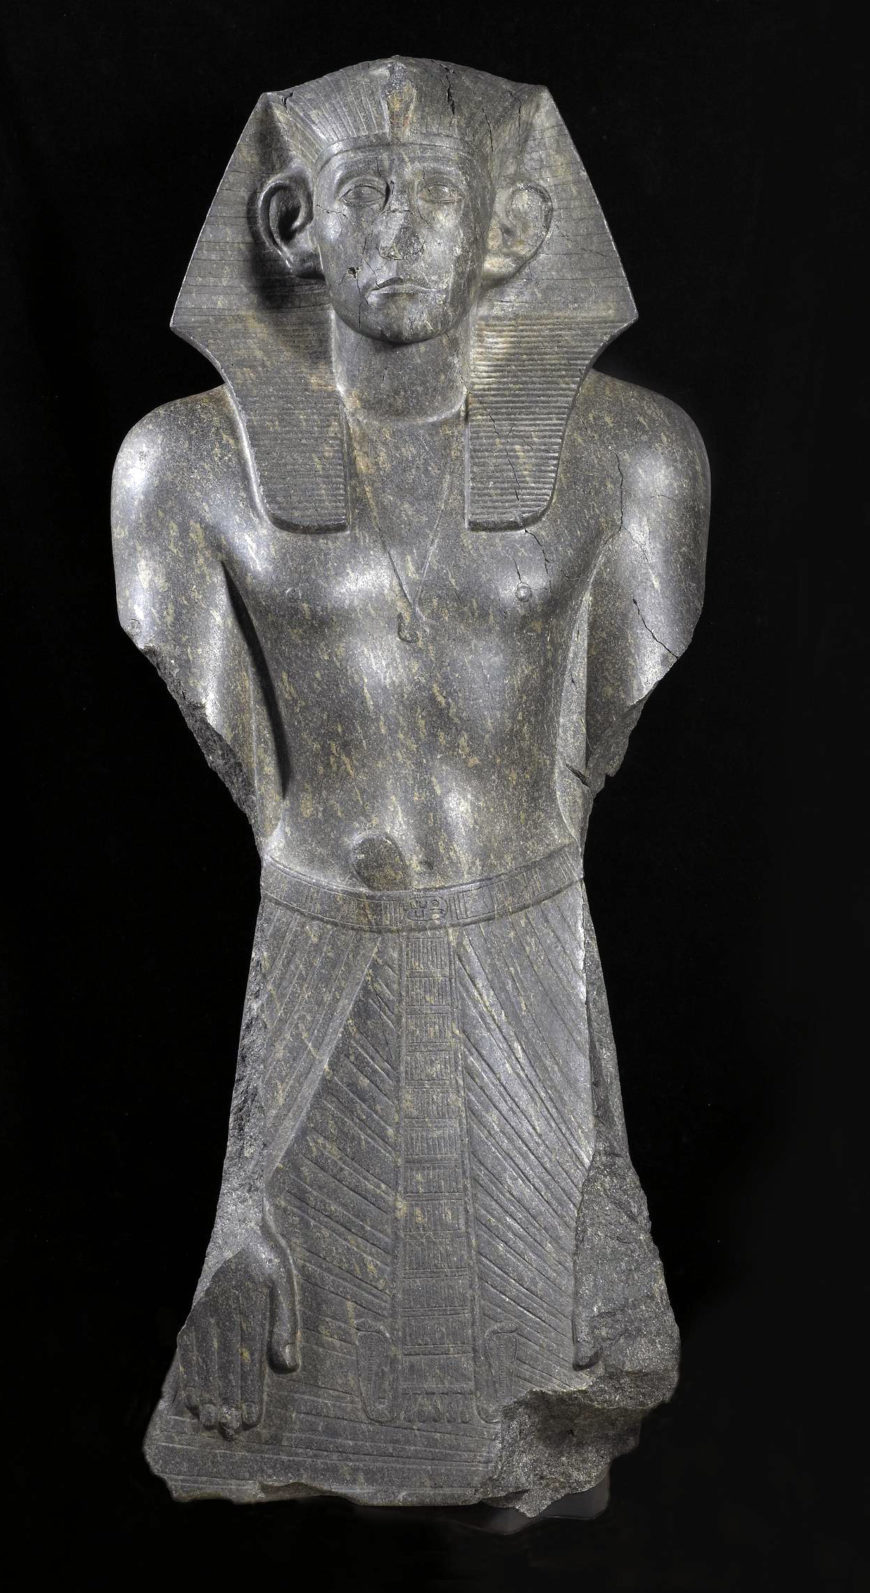 Statue of Senwosret III (Senusret III), c. 1850 B.C.E., 12th Dynasty, ancient Egypt, incised granite, found at the Temple of Mentuhotep, 122 cm high (© Trustees of the British Museum)